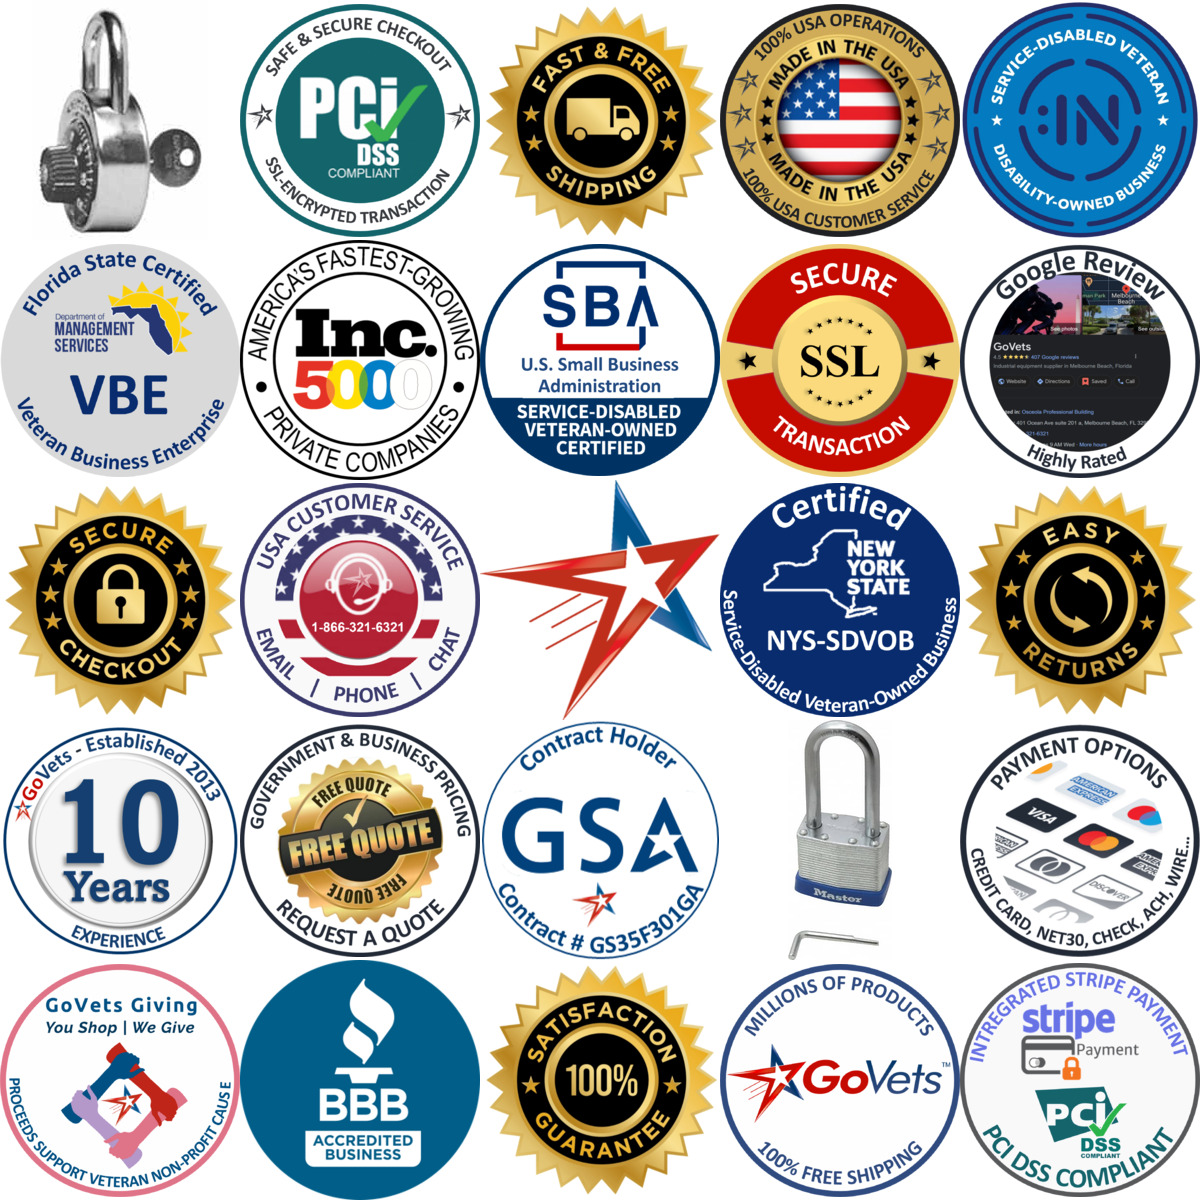 A selection of Combination Locks products on GoVets